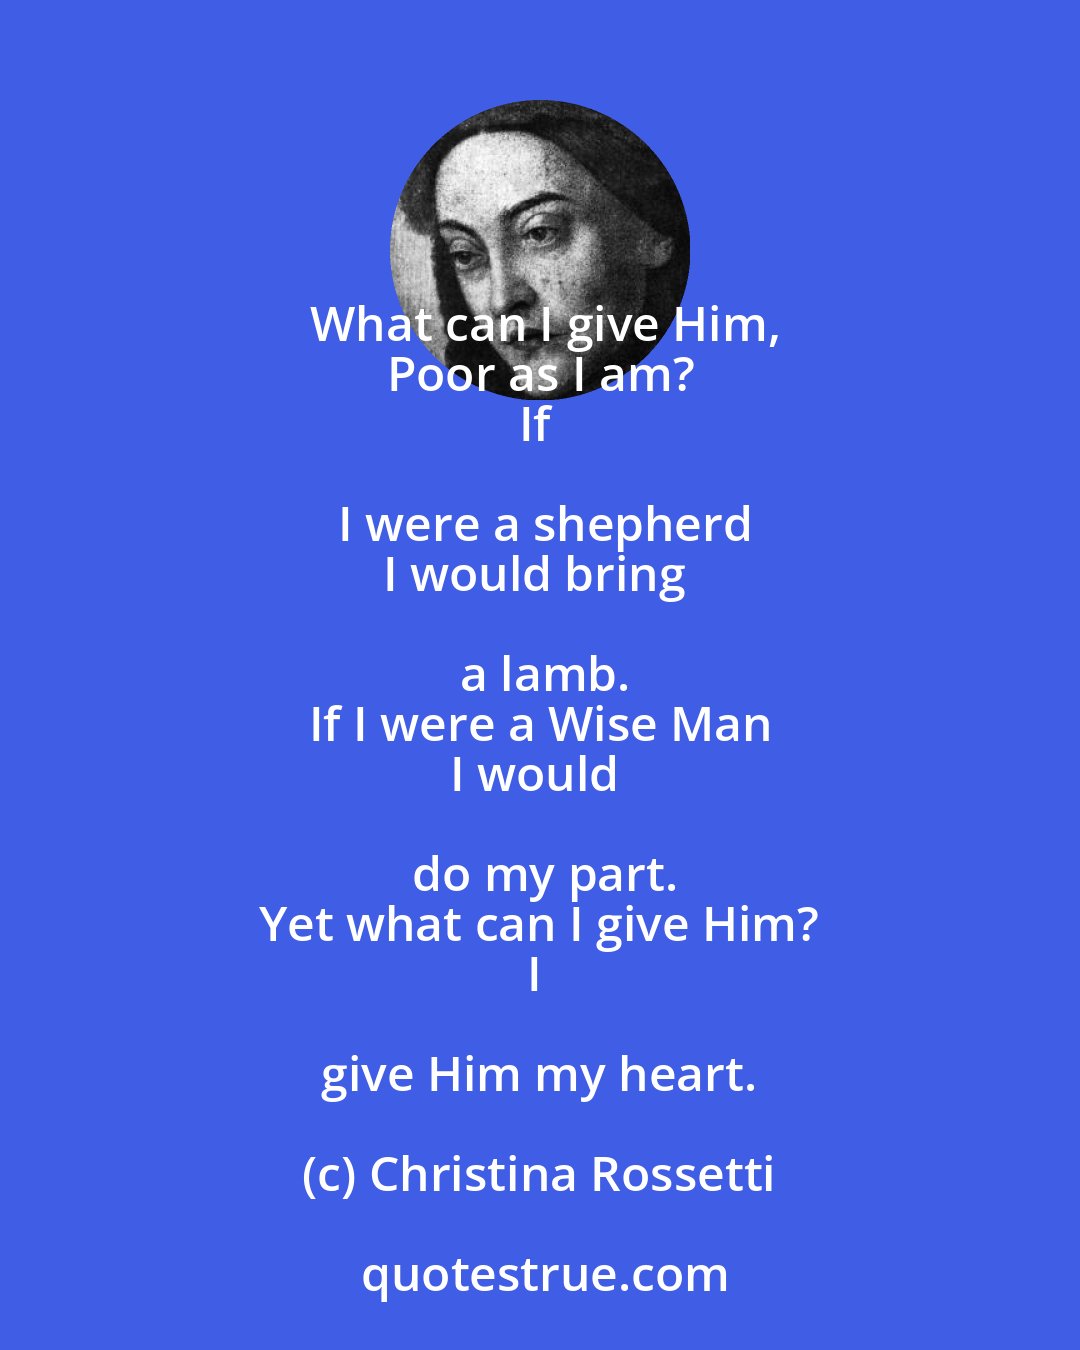 Christina Rossetti: What can I give Him,
Poor as I am?
If I were a shepherd
I would bring a lamb.
If I were a Wise Man
I would do my part.
Yet what can I give Him?
I give Him my heart.